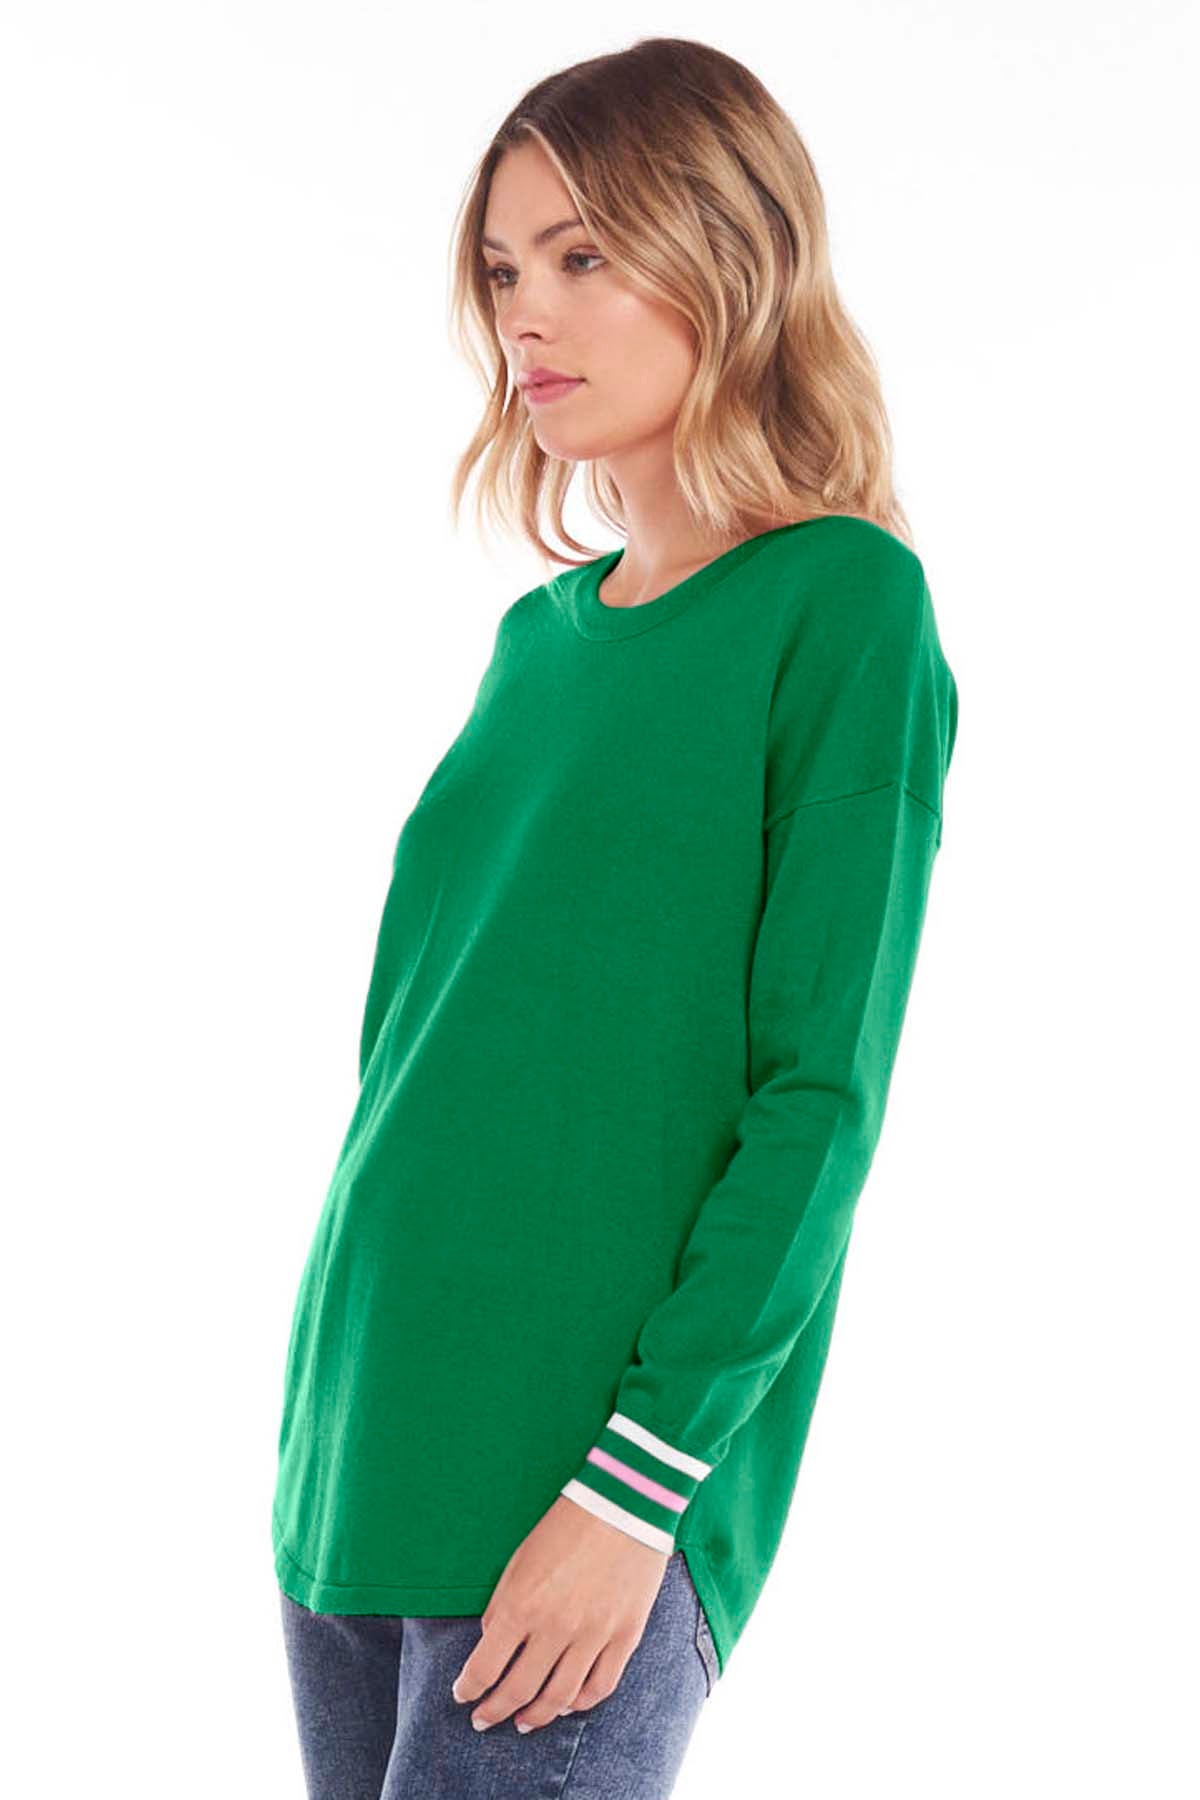 Betty Basics Sophie Knit Jumper in Lime - Hey Sara